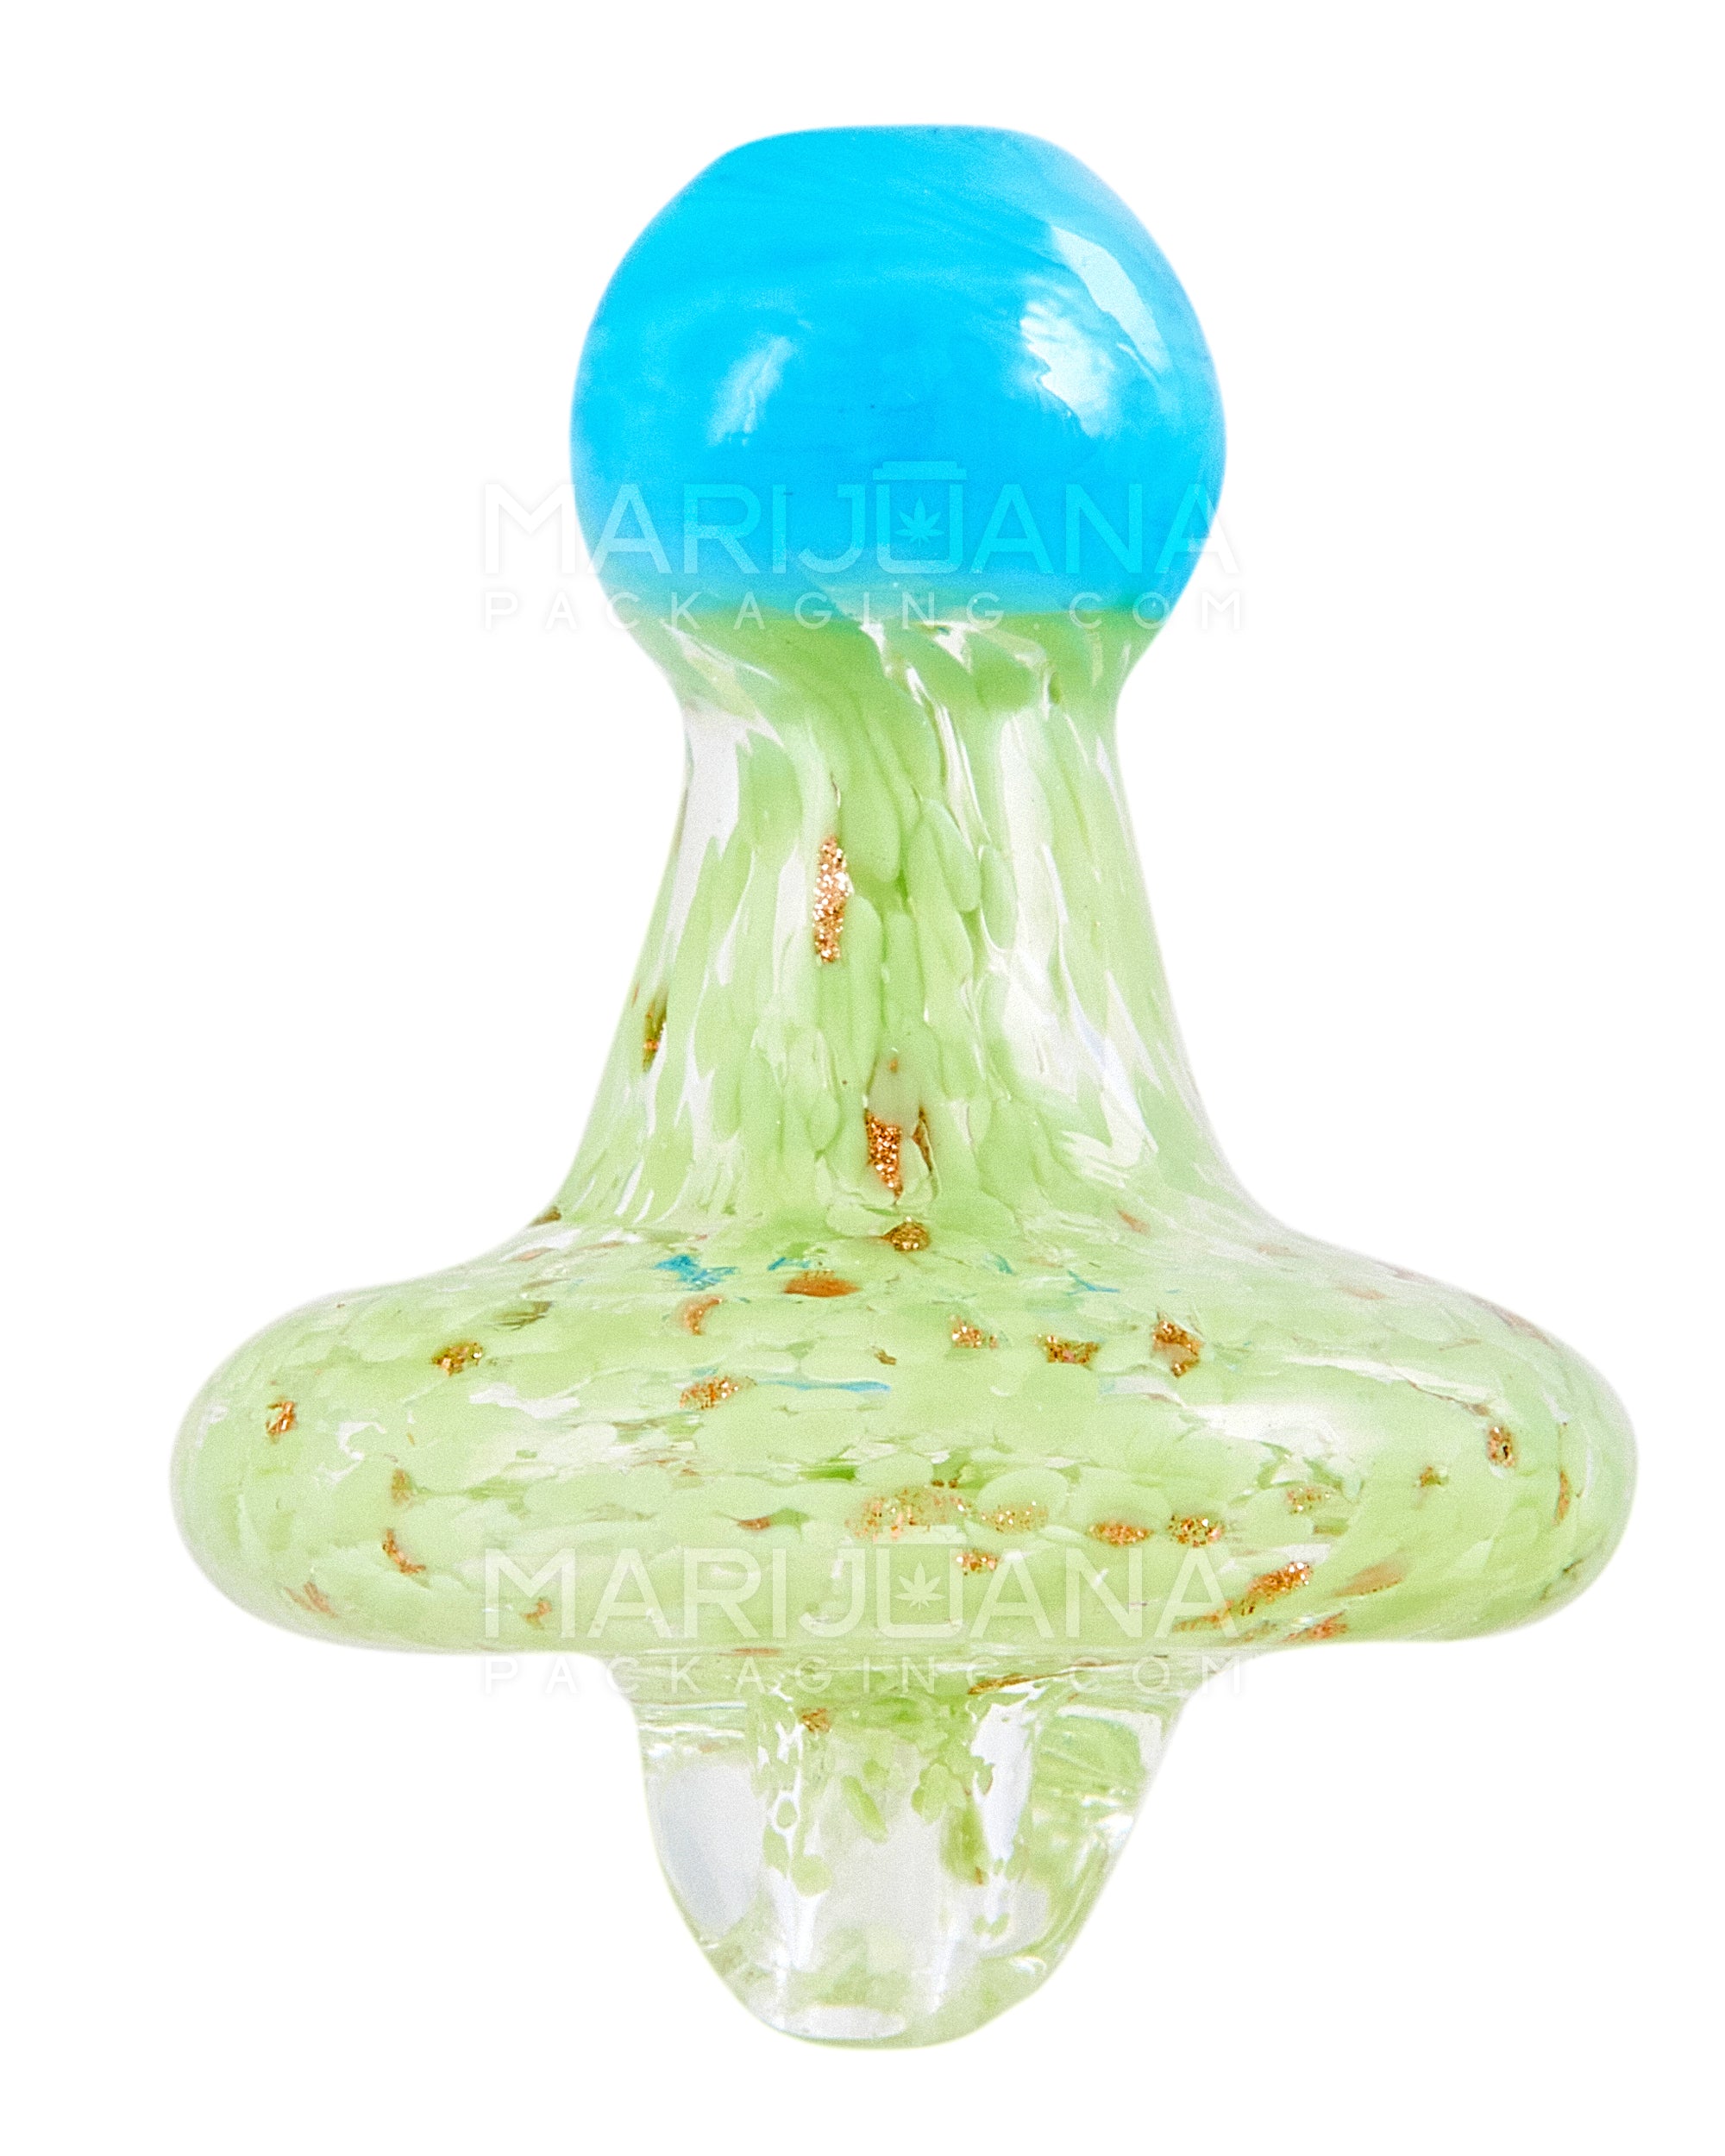 Frit Cone Directional Flow Flat Carb Cap | 30mm - Glass - Assorted - 5